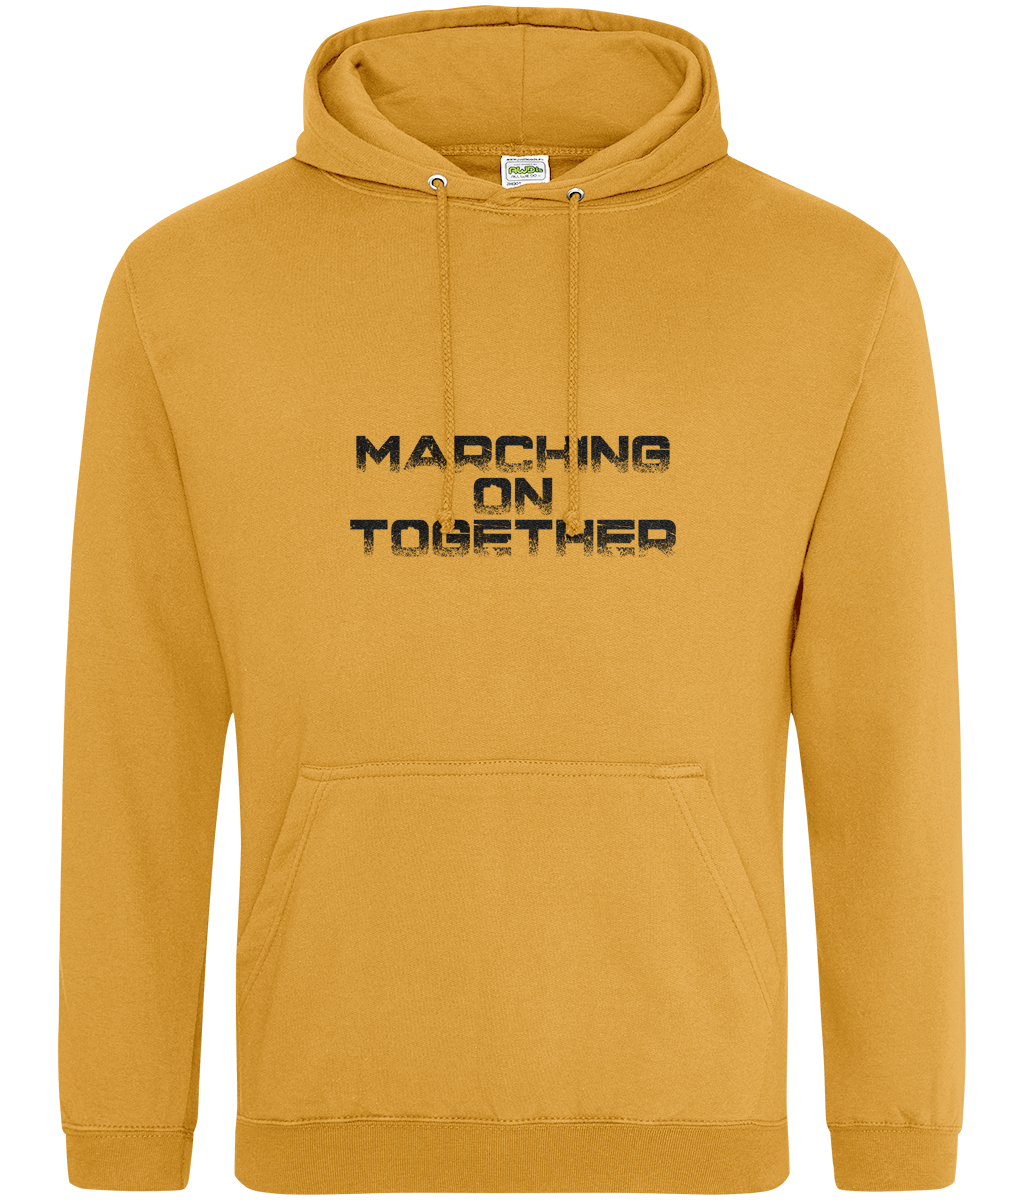 Marching on together Hoodie Men